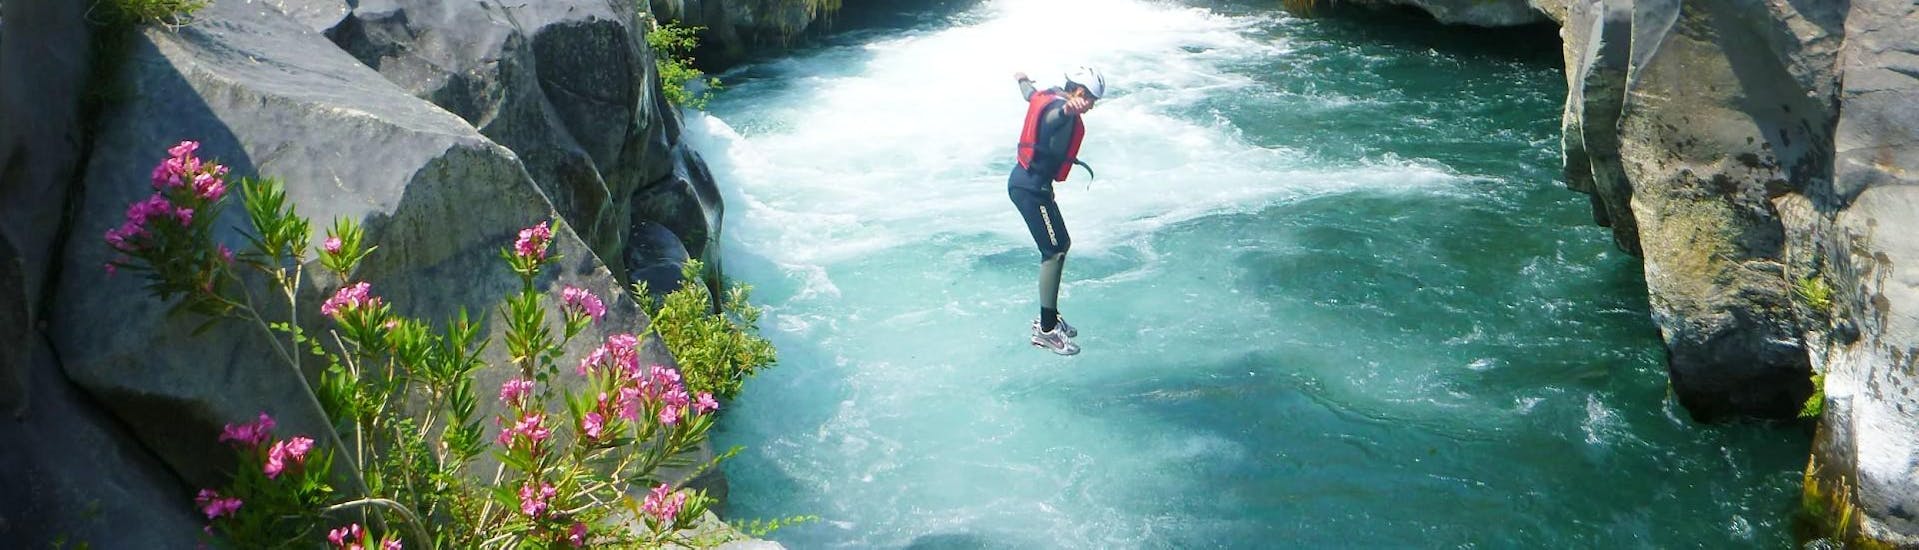 A brave participant jumping from a rock during the canyoning with Sicilia Adventure.